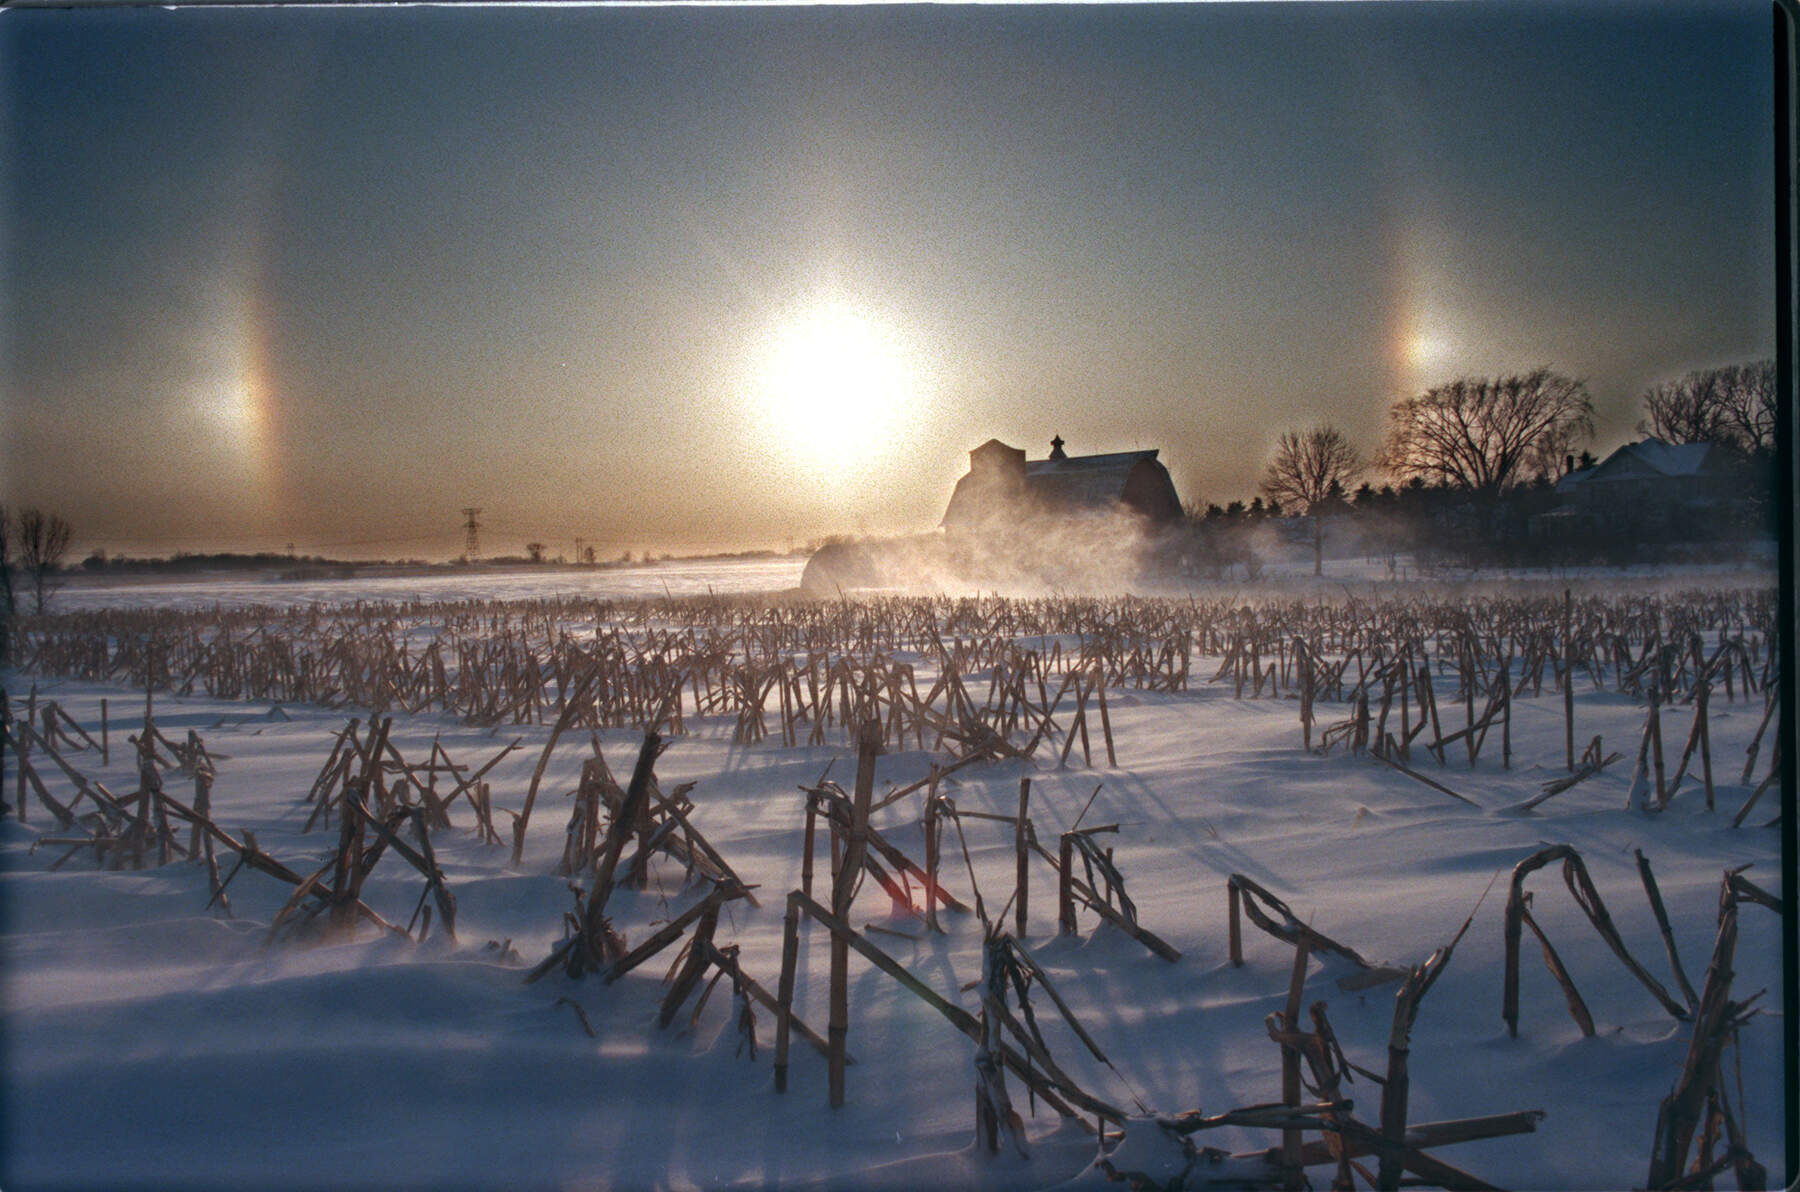 Sundogs bracketed the setting sun as the wind whipped up snow on a frozen corn field in Minnesota. (Photo By DAVID BREWSTER/Star Tribune via Getty Images)